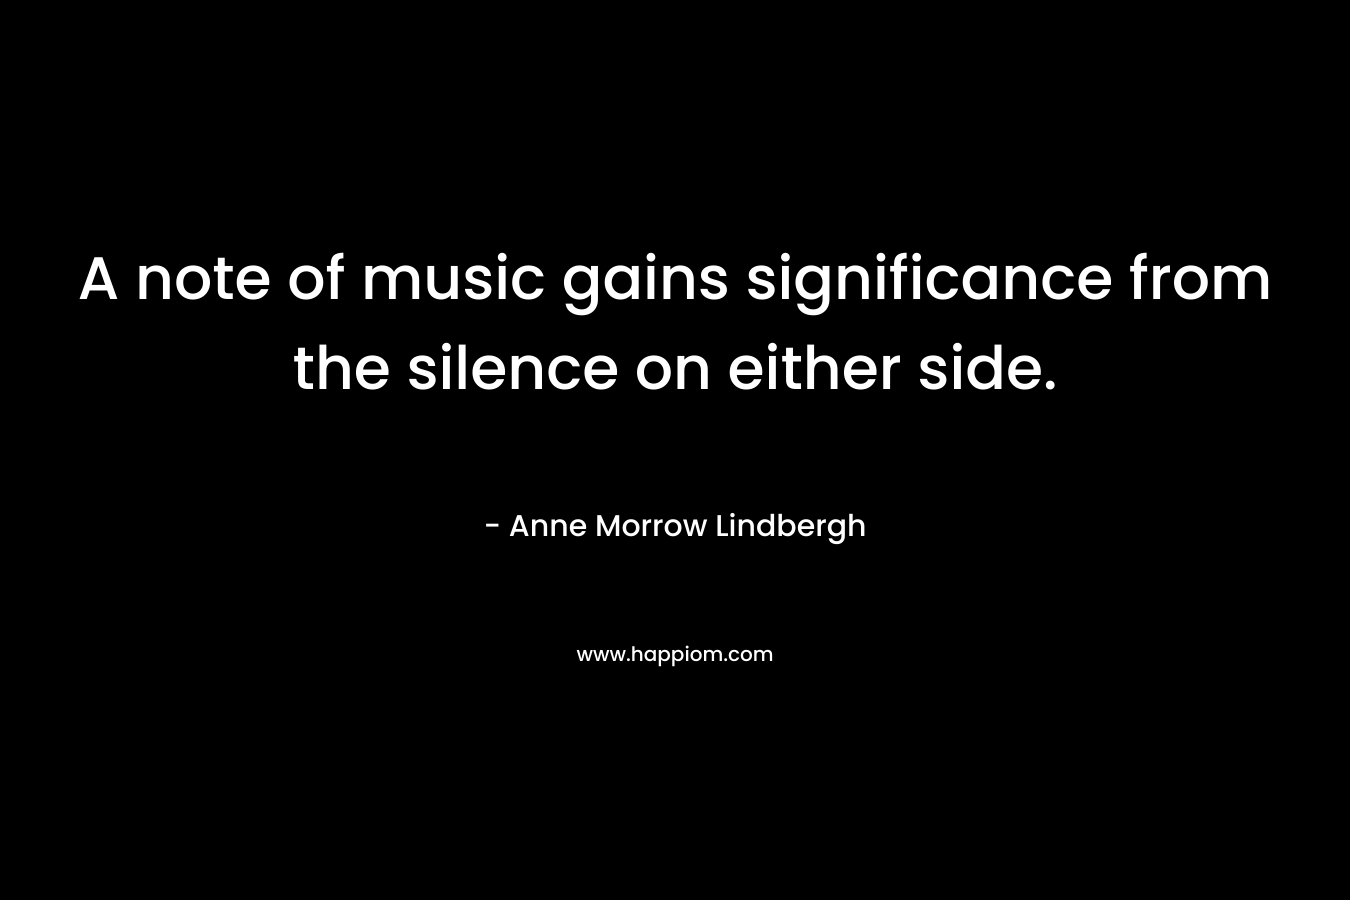 A note of music gains significance from the silence on either side. – Anne Morrow Lindbergh